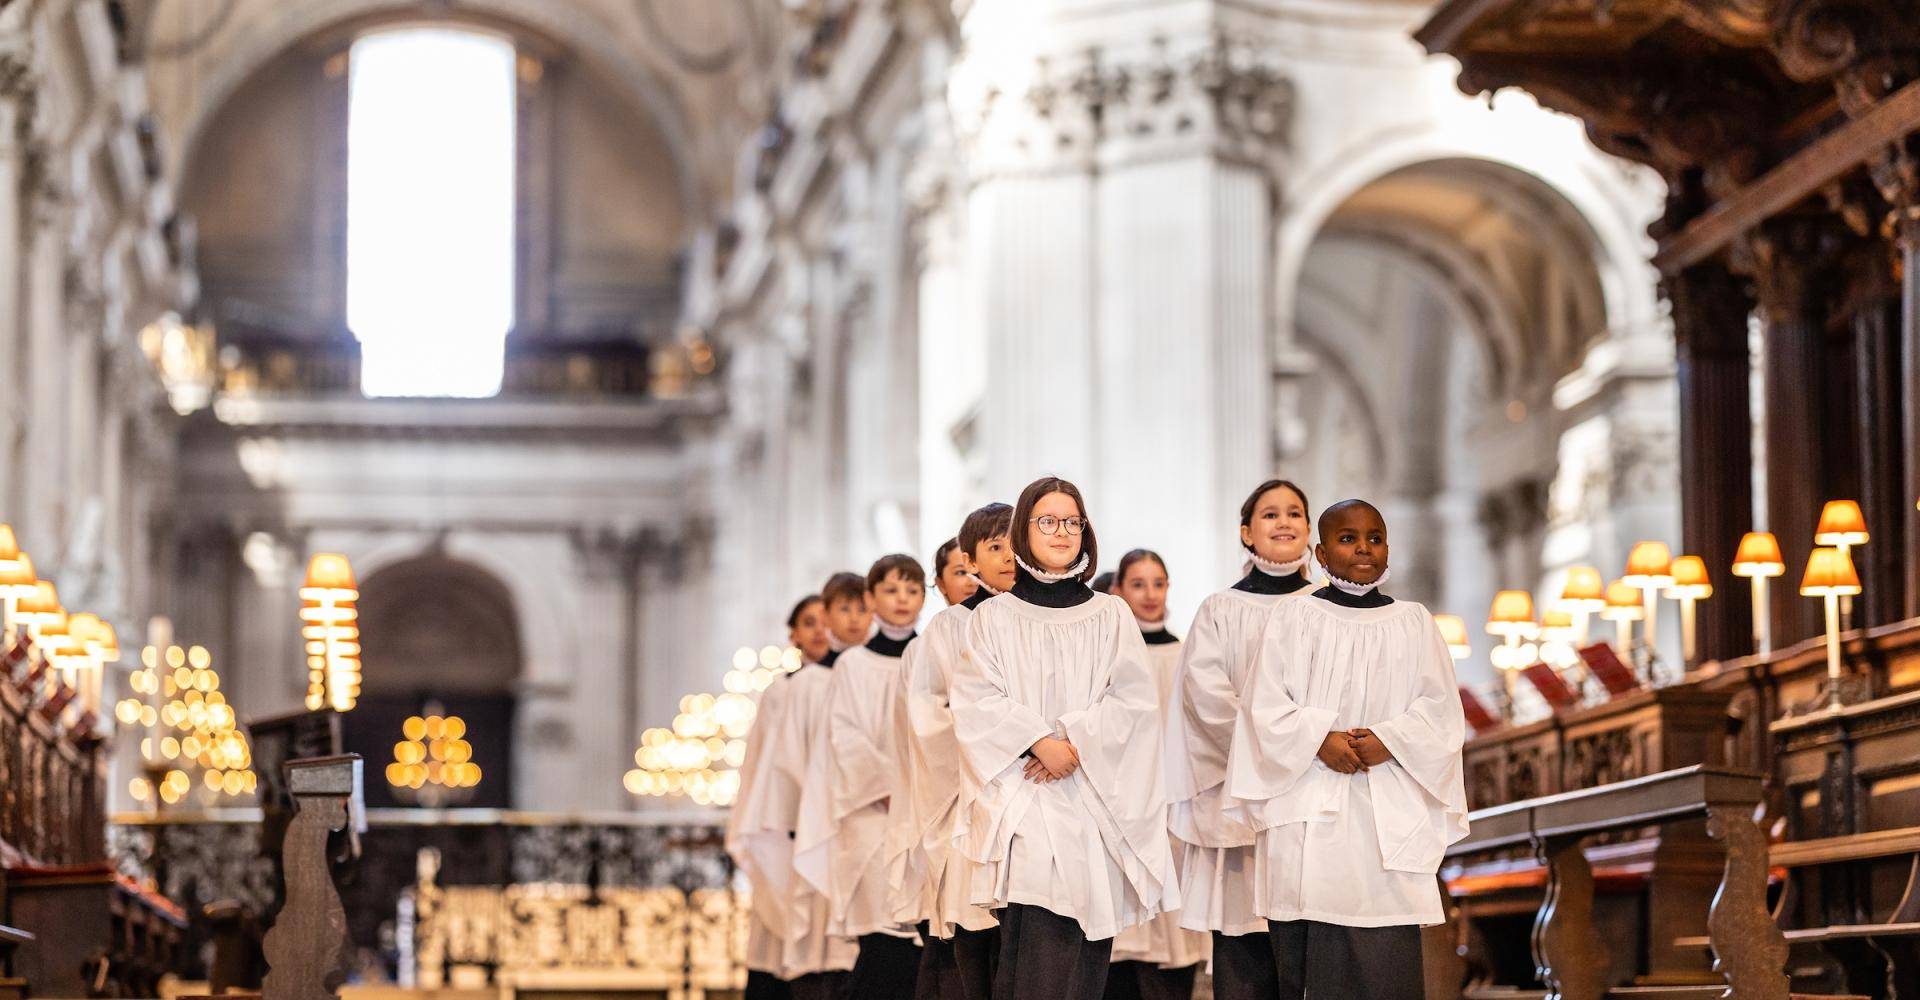 Girl and boy choristers in robes walking in the quire